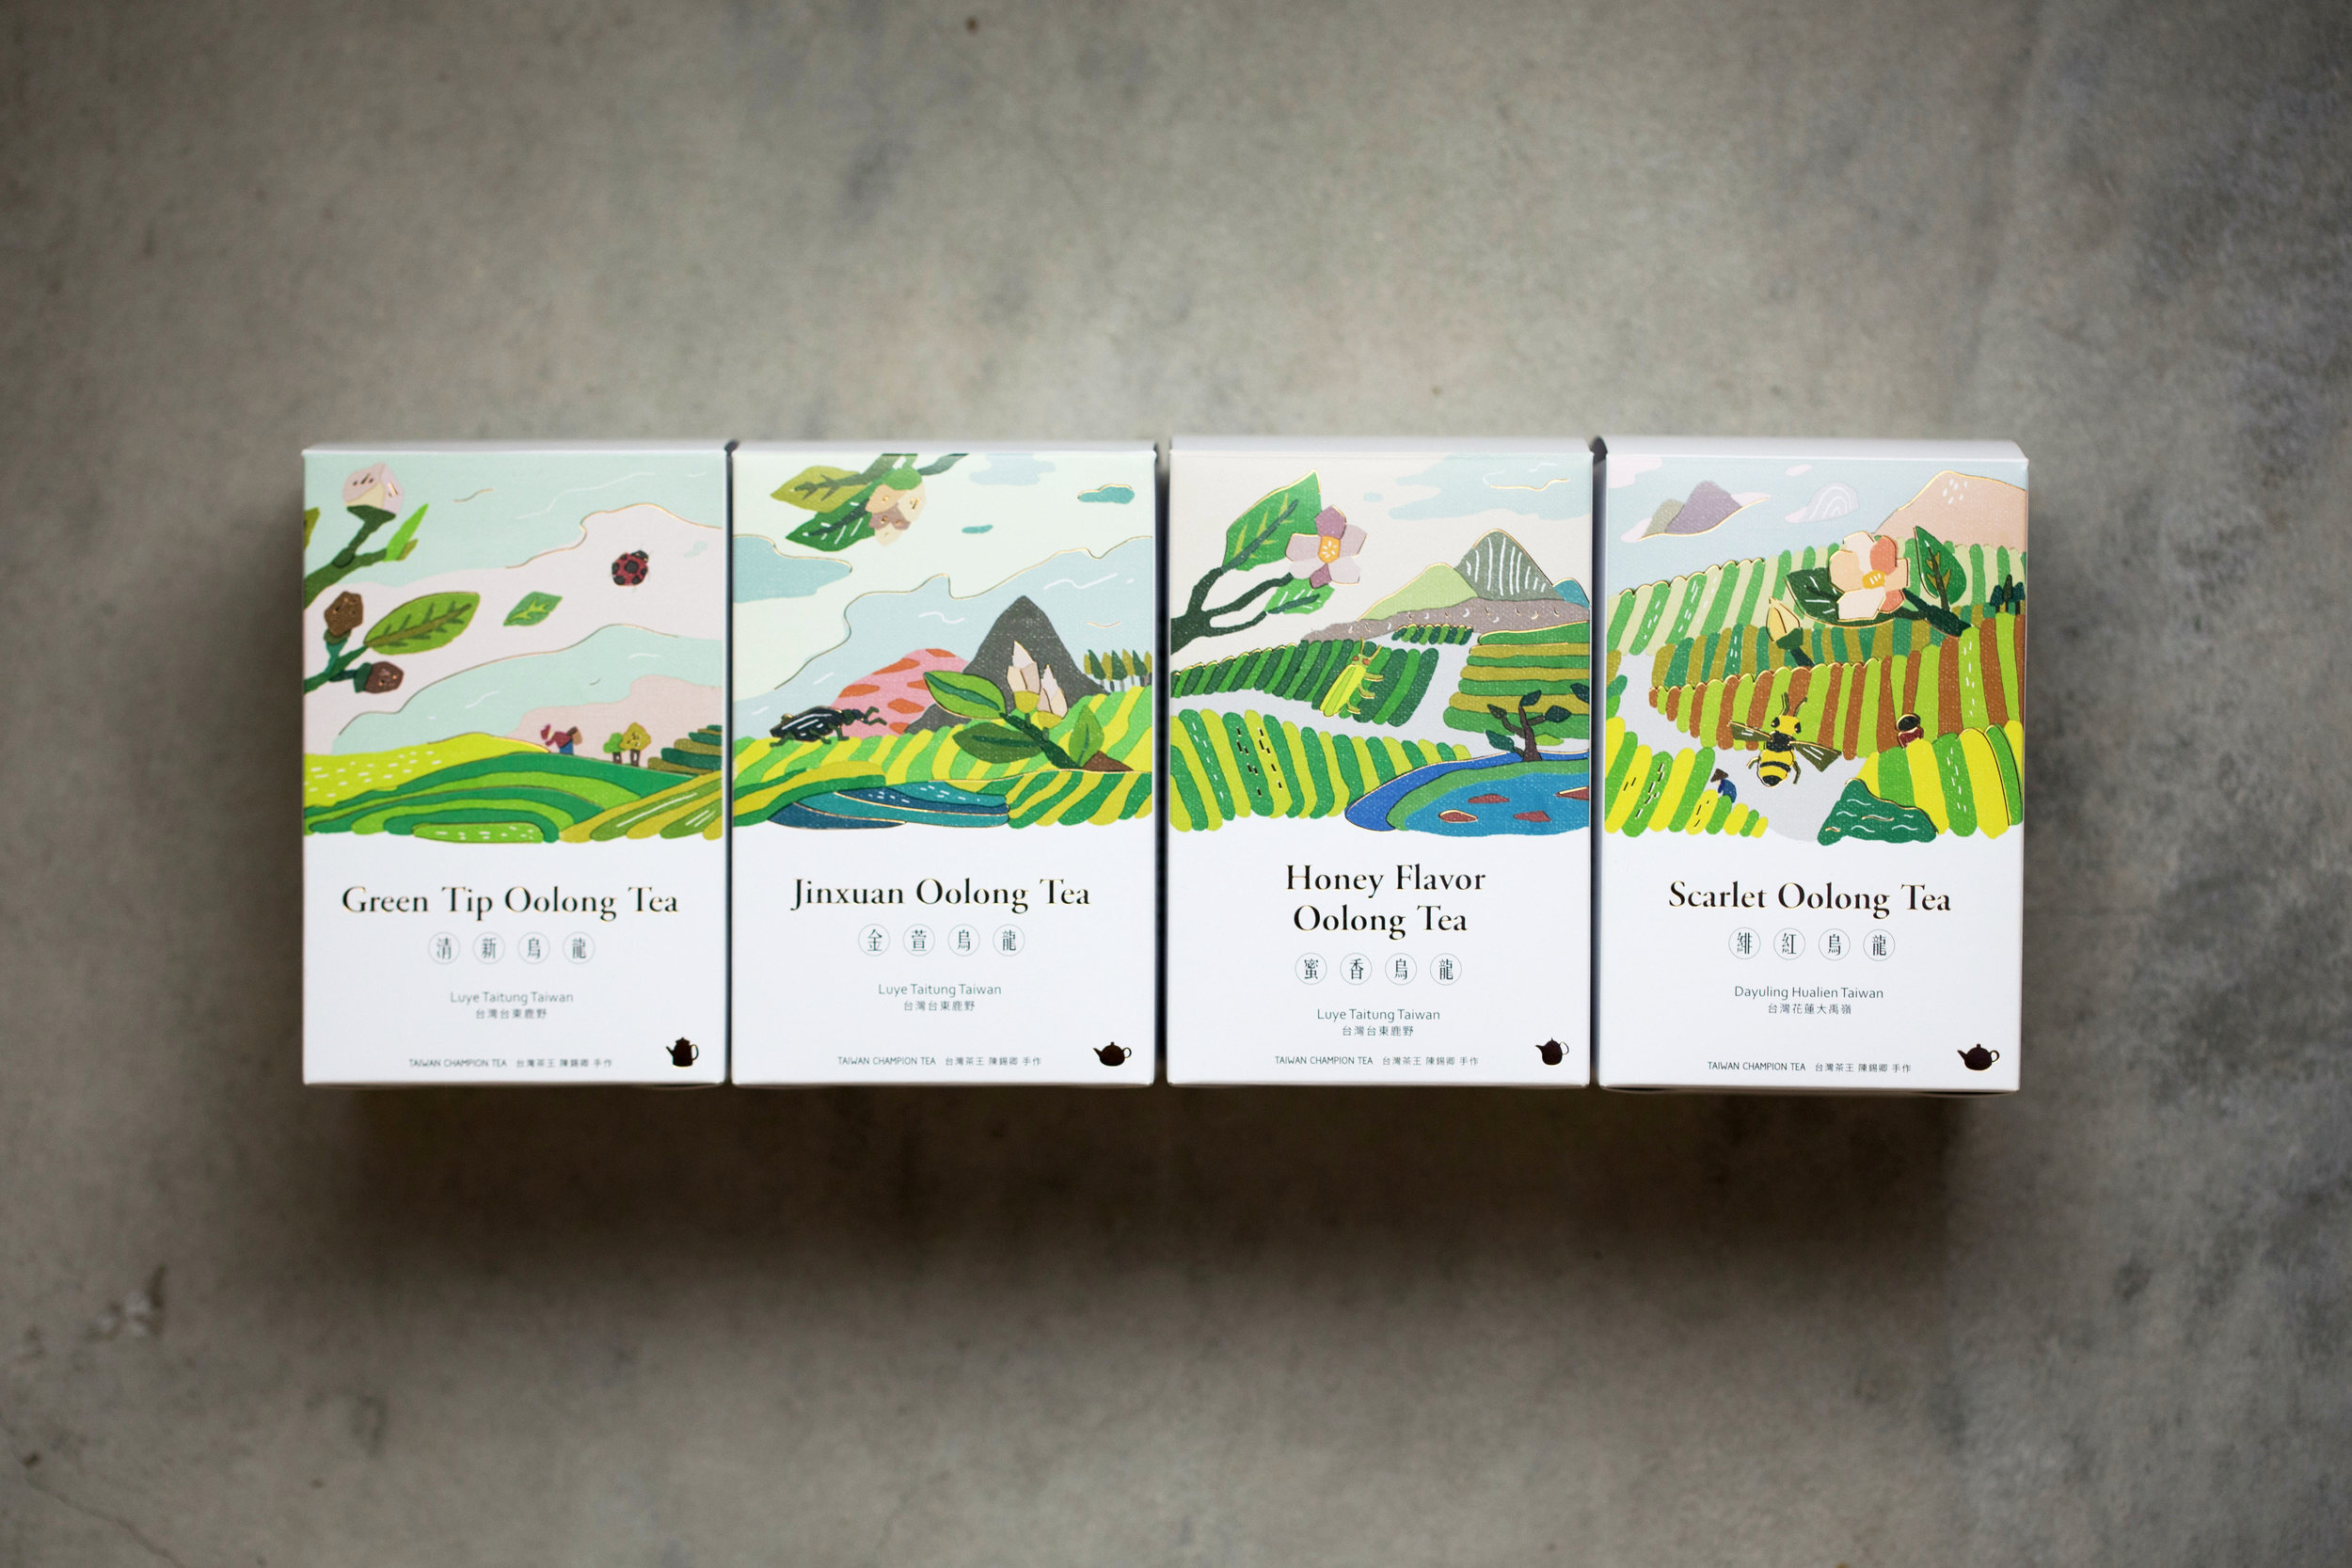 A Series of Packaging Design Illustrations Showing Taiwanese Minimalist Design